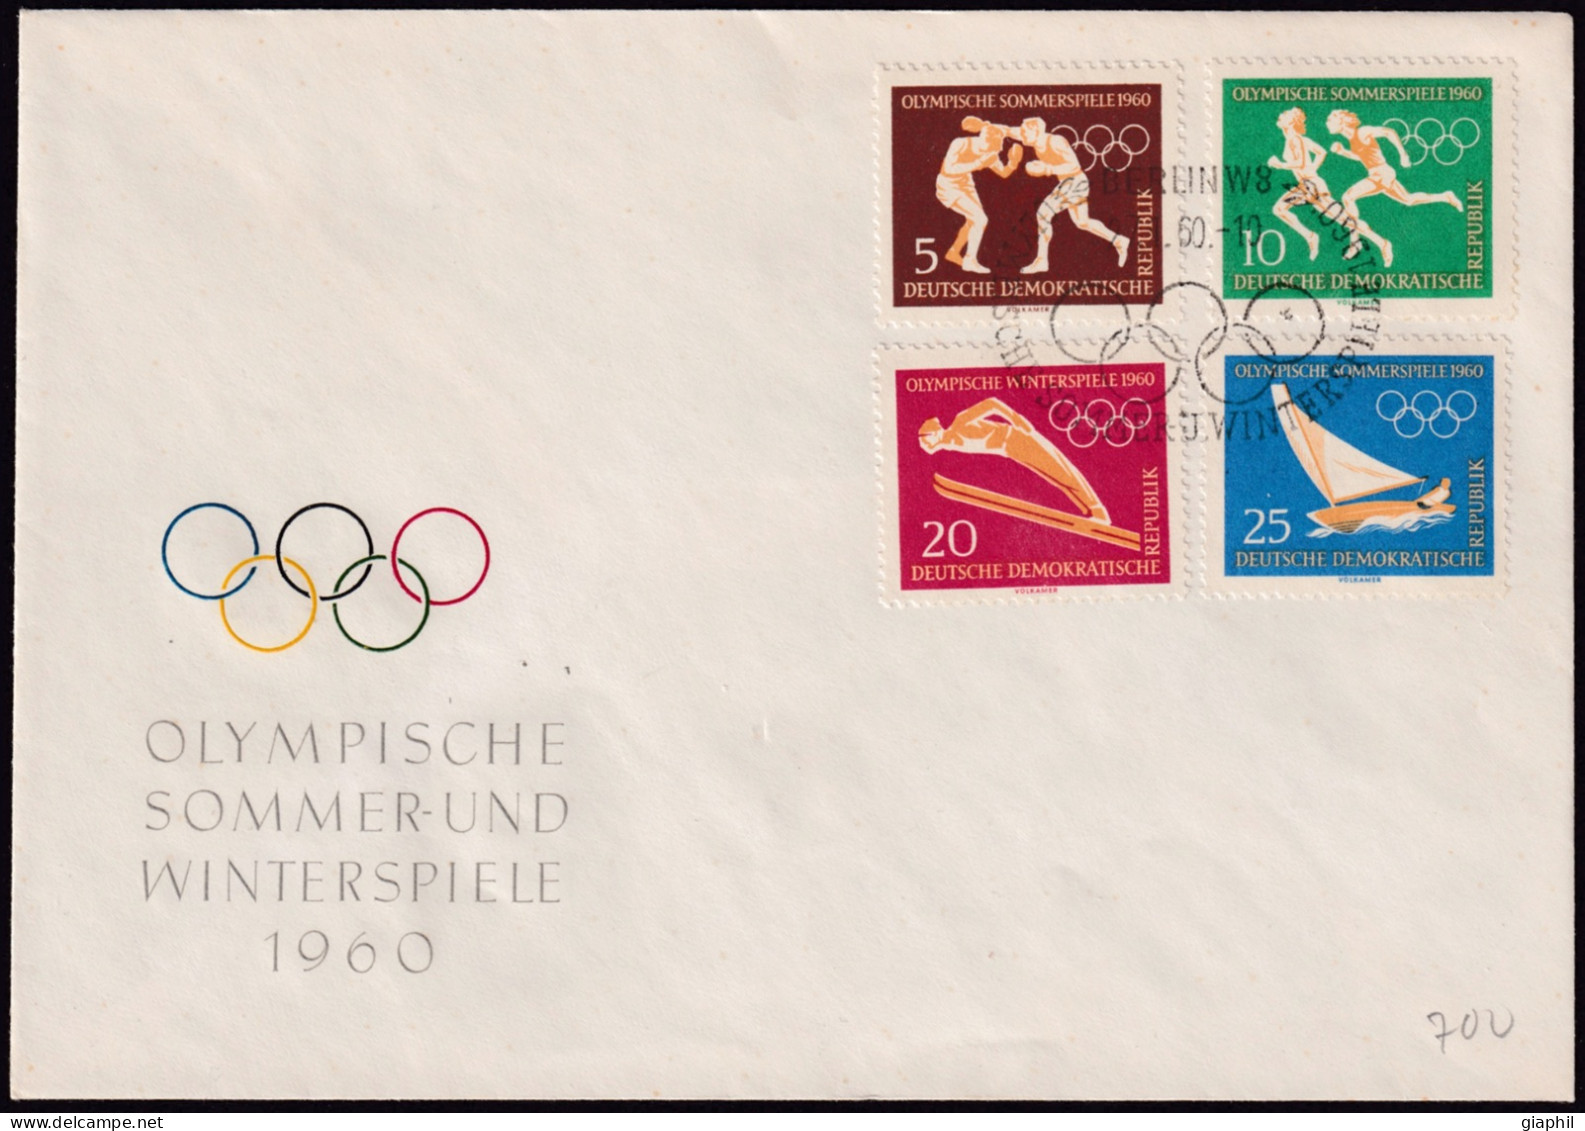 GERMANY EAST - DDR 1960 FDC ROME OLYMPIC GAMES (Mi. 746-749)  OFFER! - Summer 1960: Rome